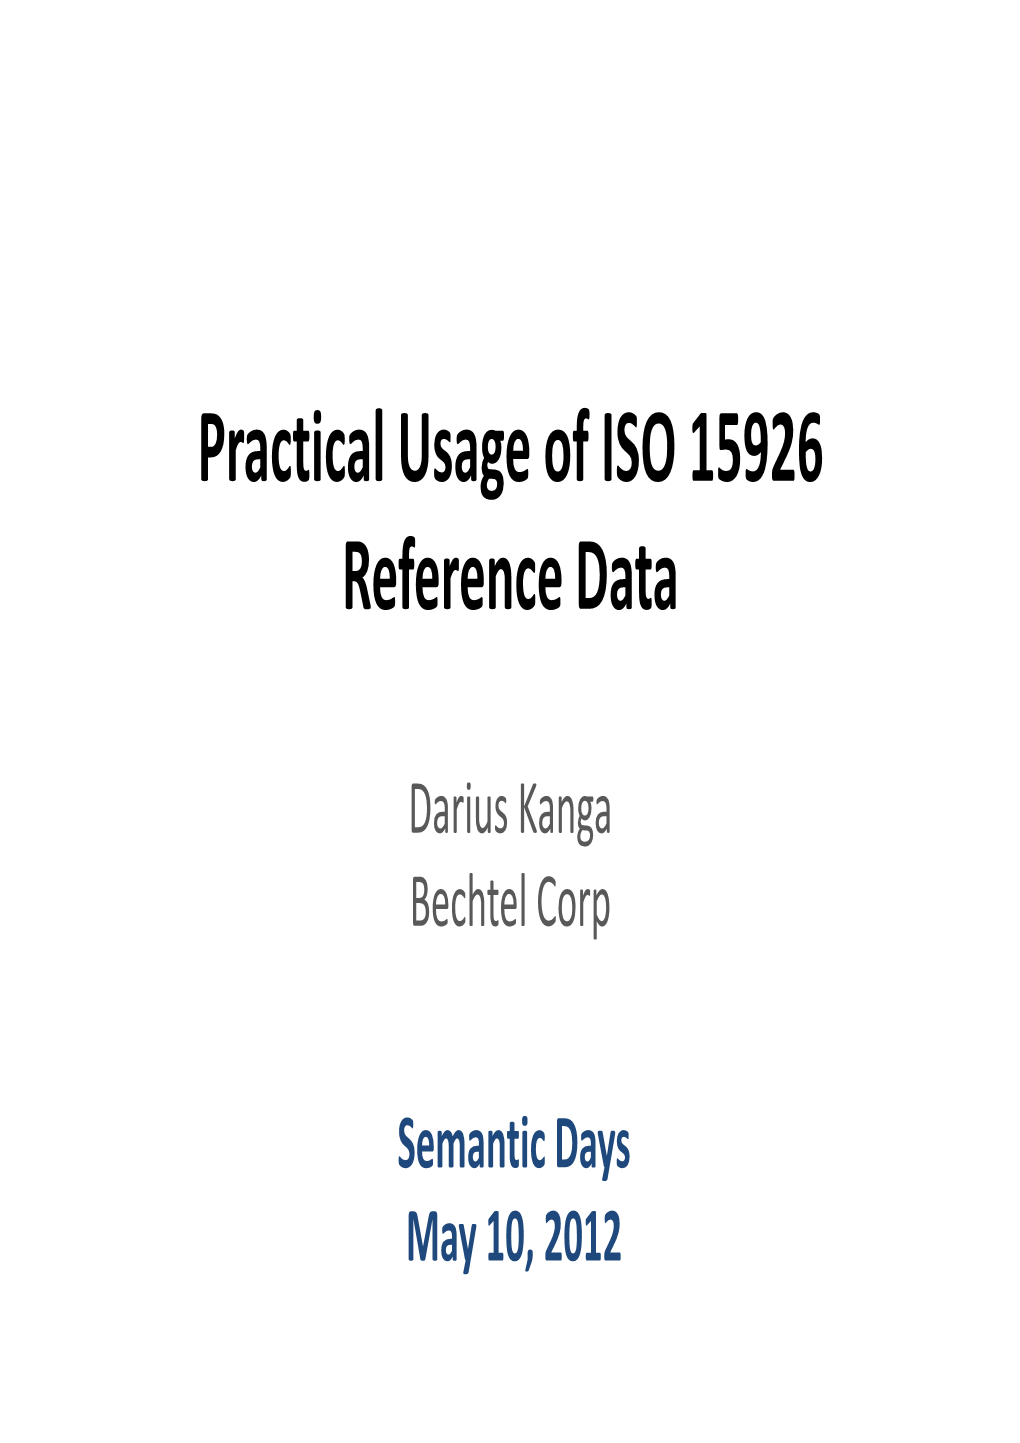 Practical Usage of ISO 15926 Reference Data